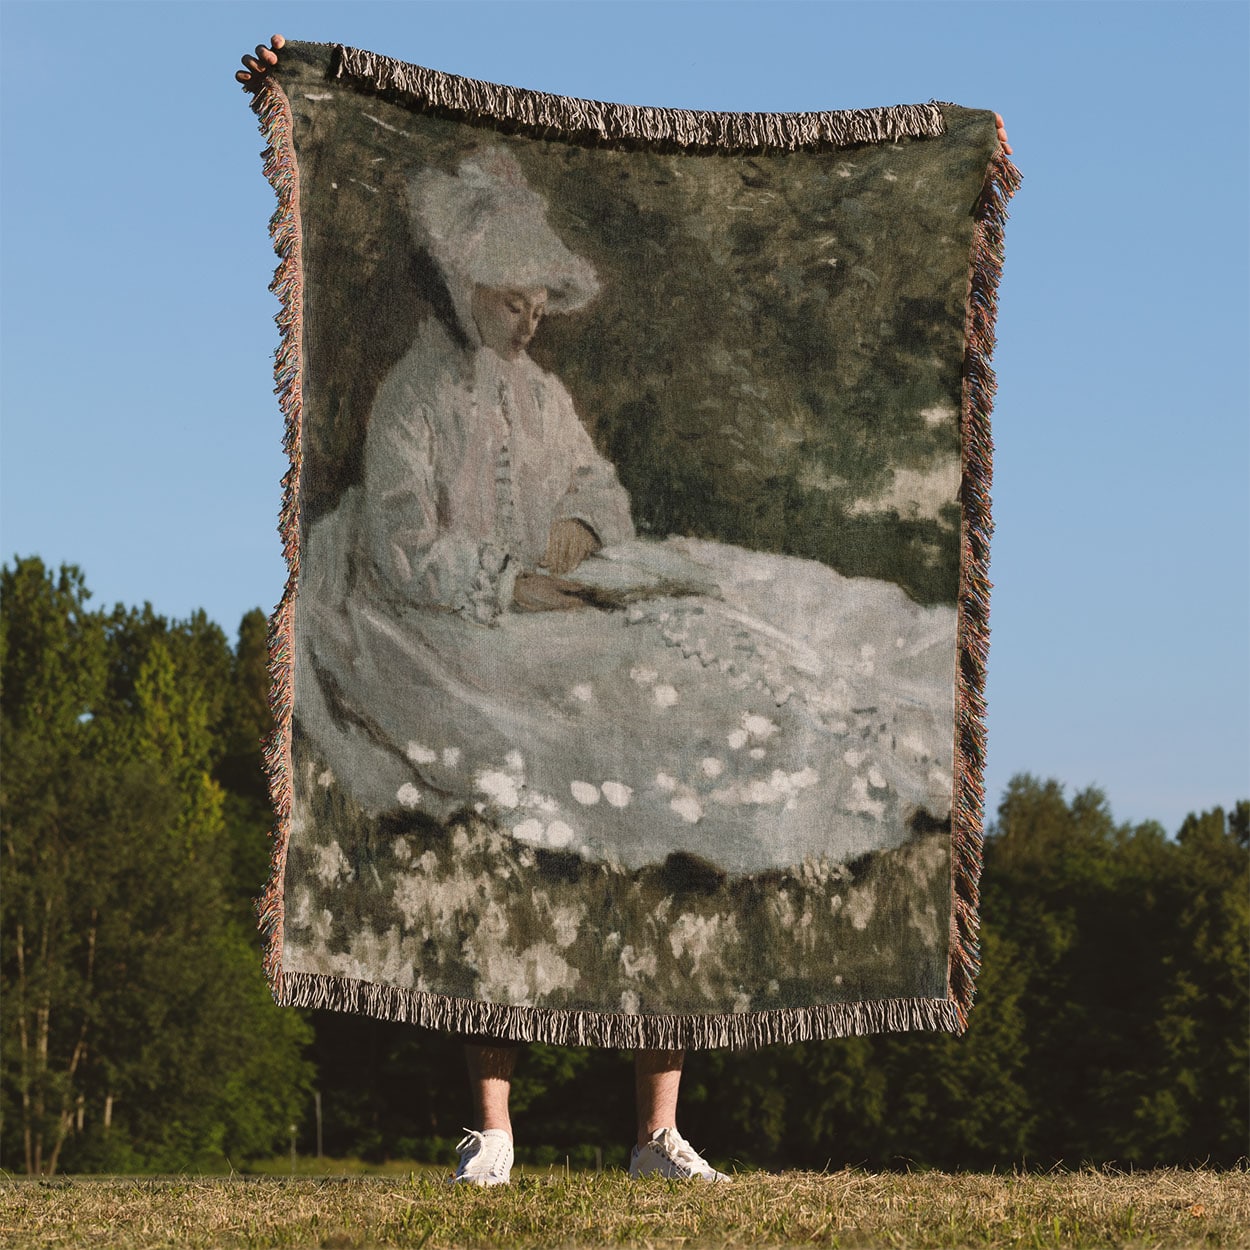 Woman in a White Dress Woven Blanket Held Up Outside